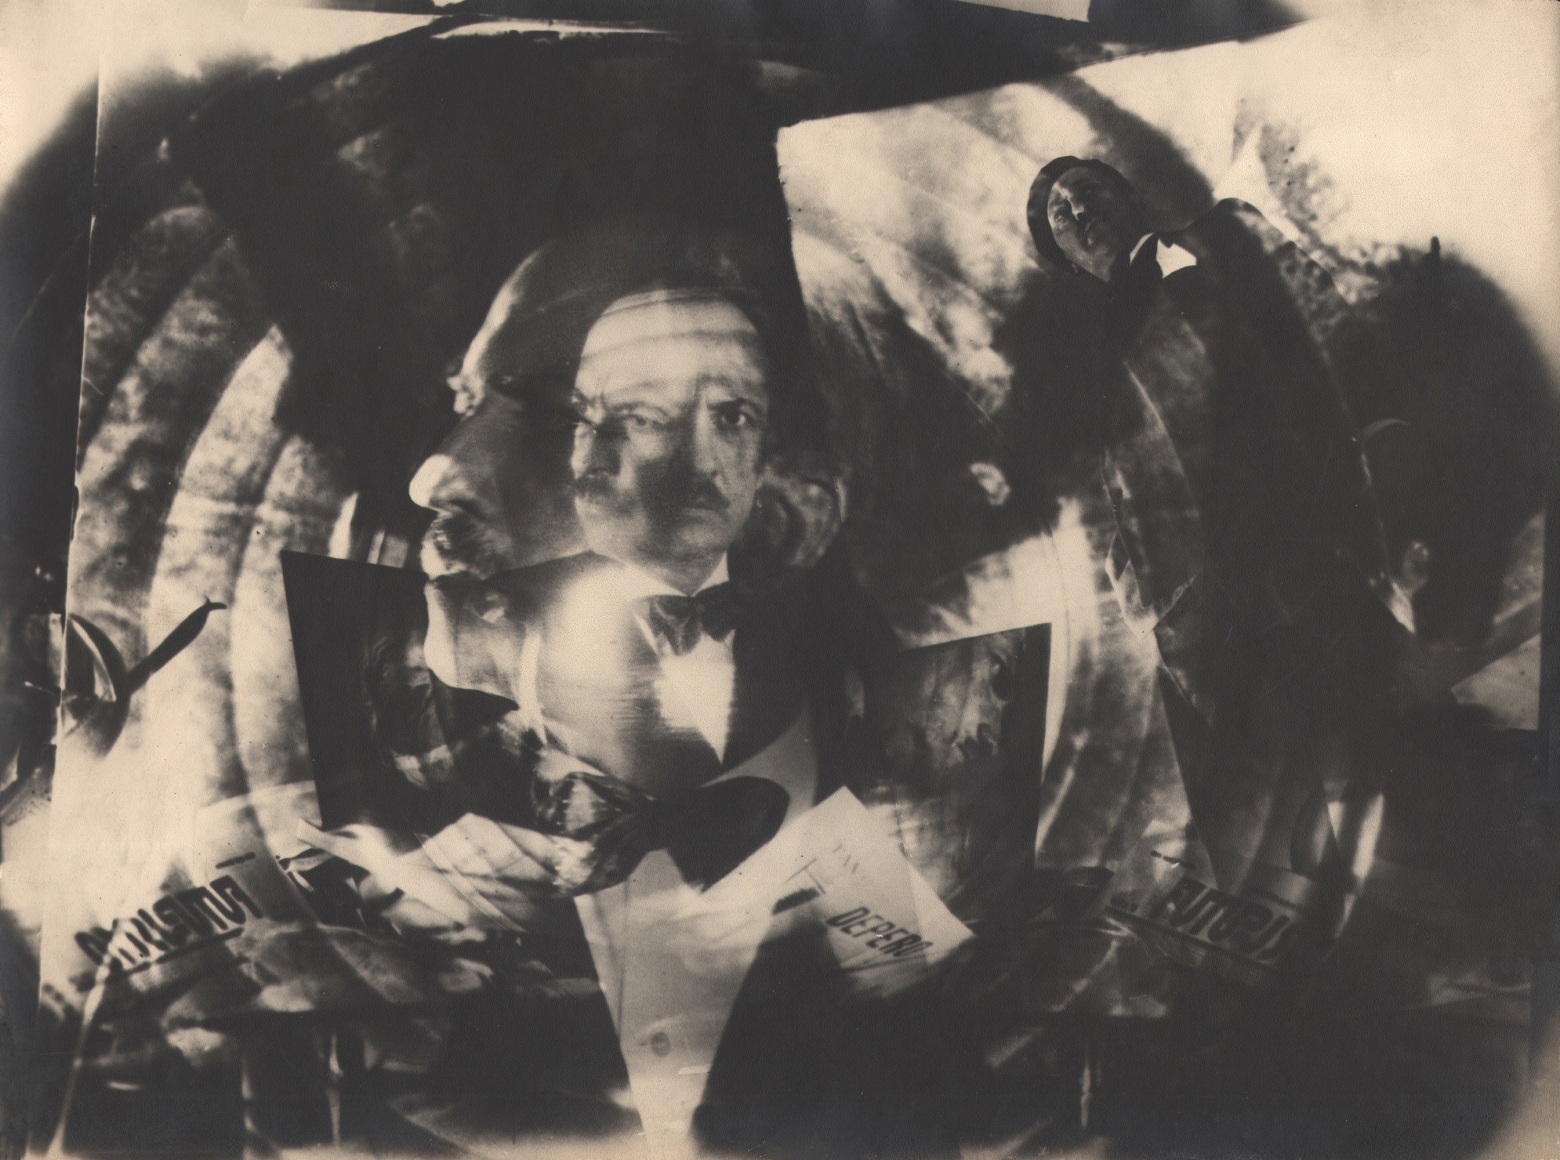 Elio Luxardo, F.T. Marinetti, ​1930. Abstract portrait featuring a man with a mustache in a tuxedo and a distortion with concentric circles.